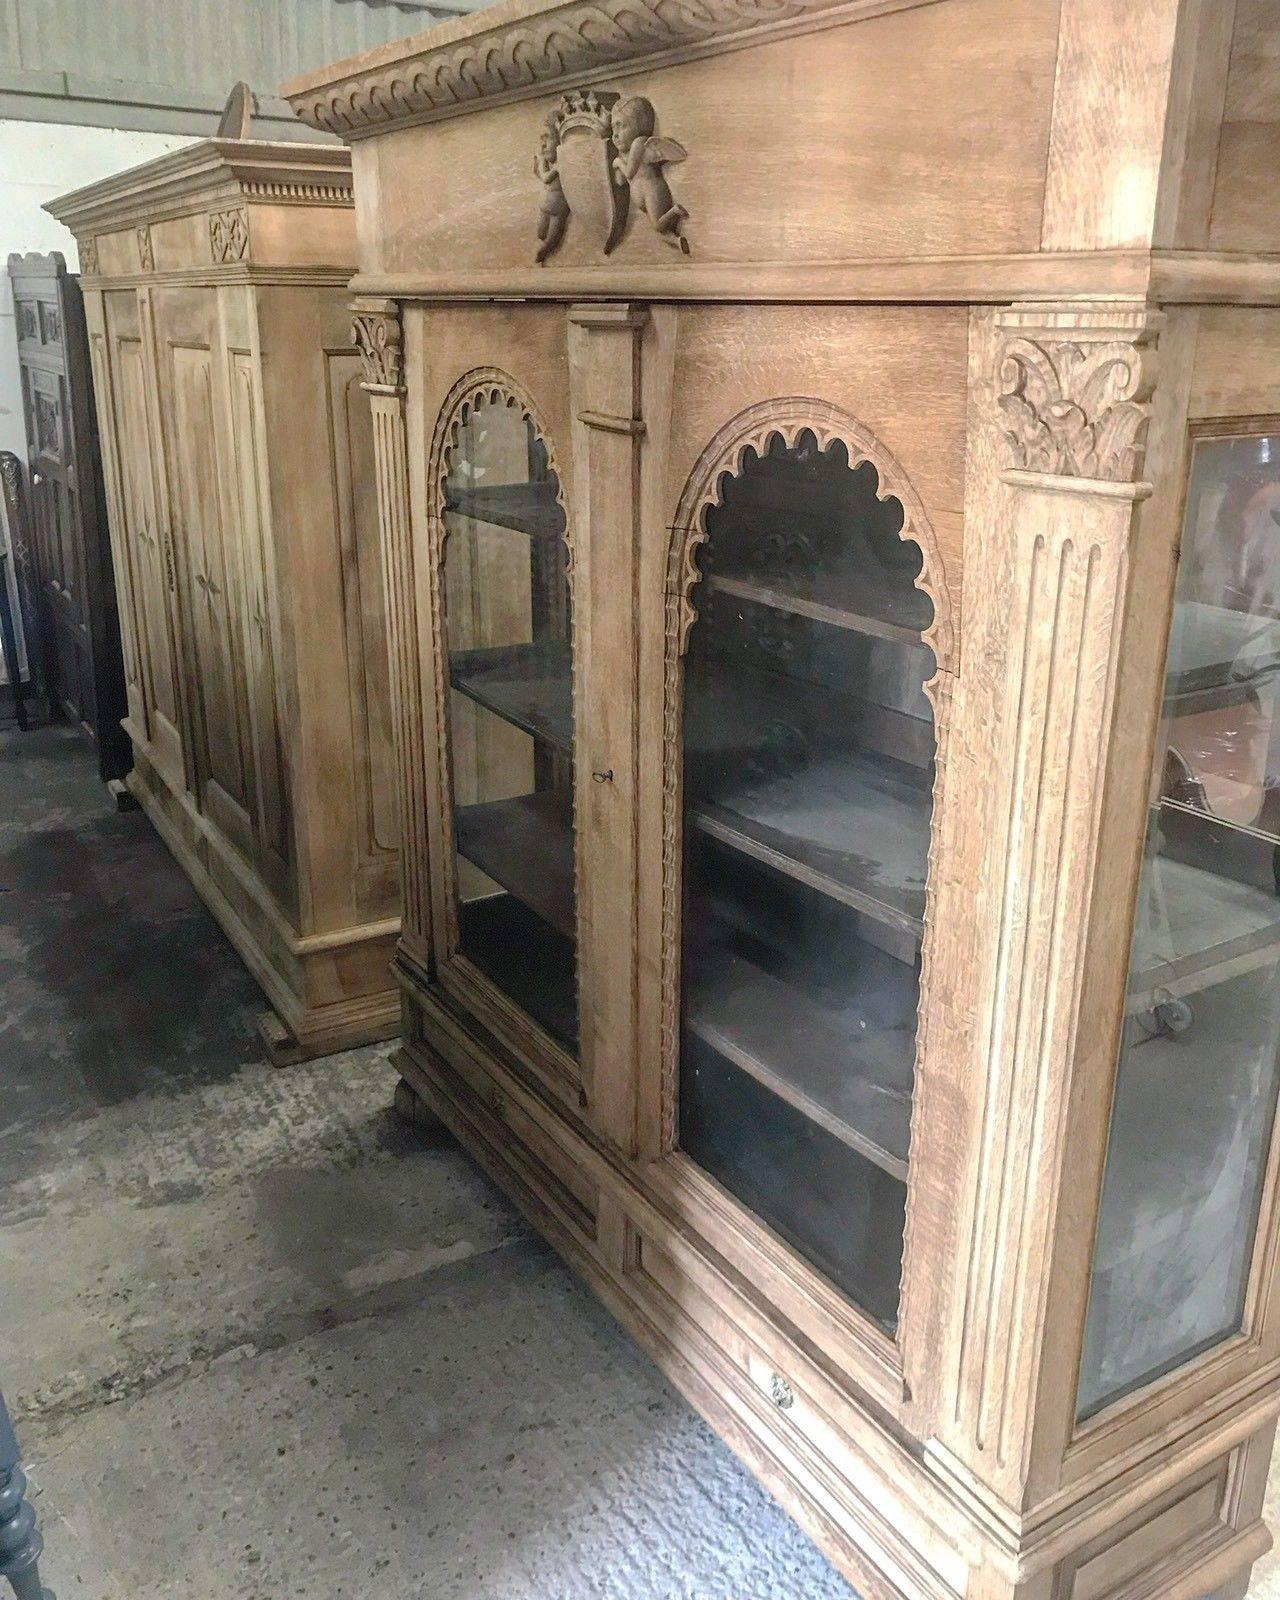 Super Rare 18th Century French Antique Armoire Cupboard Country Display Vintage In Good Condition For Sale In Lingfield, West Sussex